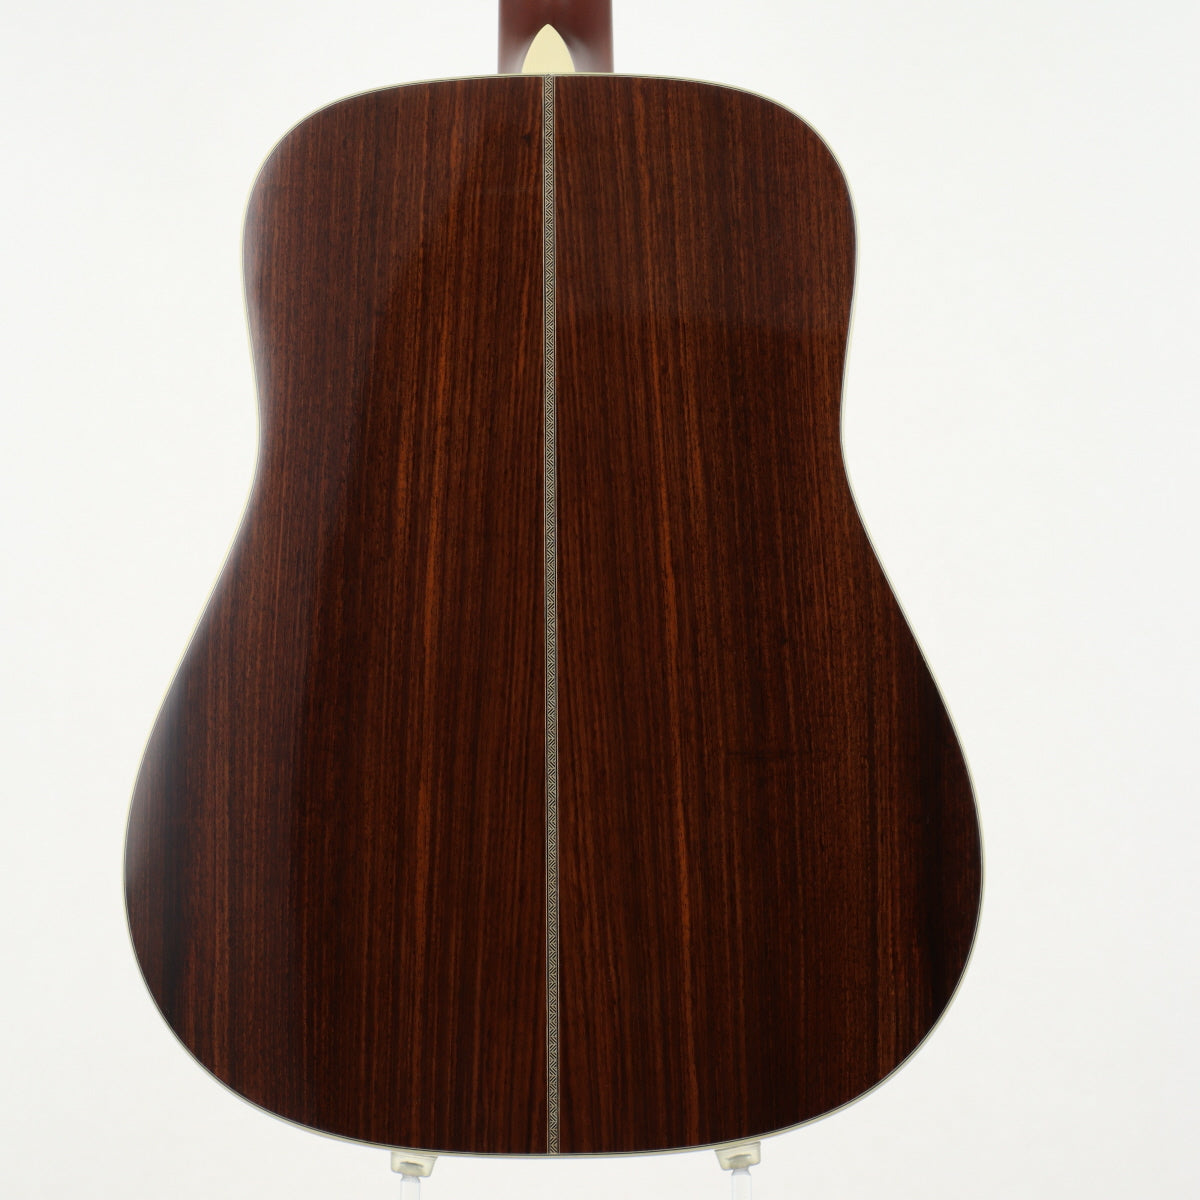 [SN 1249828] USED Martin / D-28 Marquis -MINT- Natural [11]